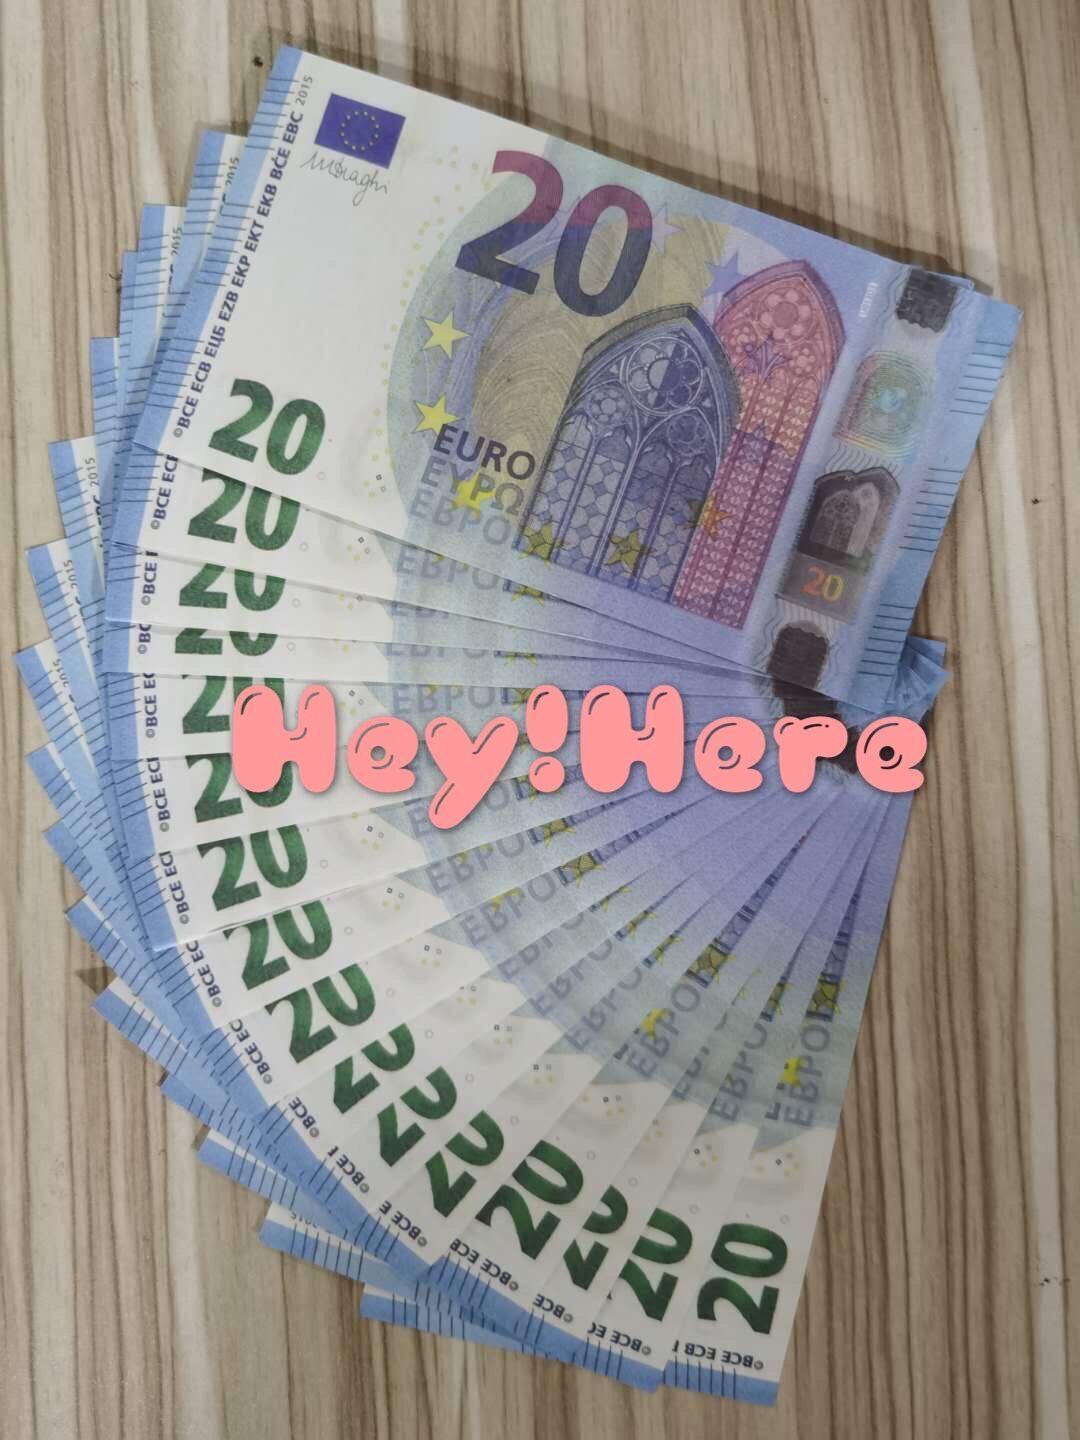 Nightclub Most Fake Realistic Prop Copy Money Note Movie Euros Bank Business Play 12 Paper For Collection 20 Uvgwc от DHgate WW